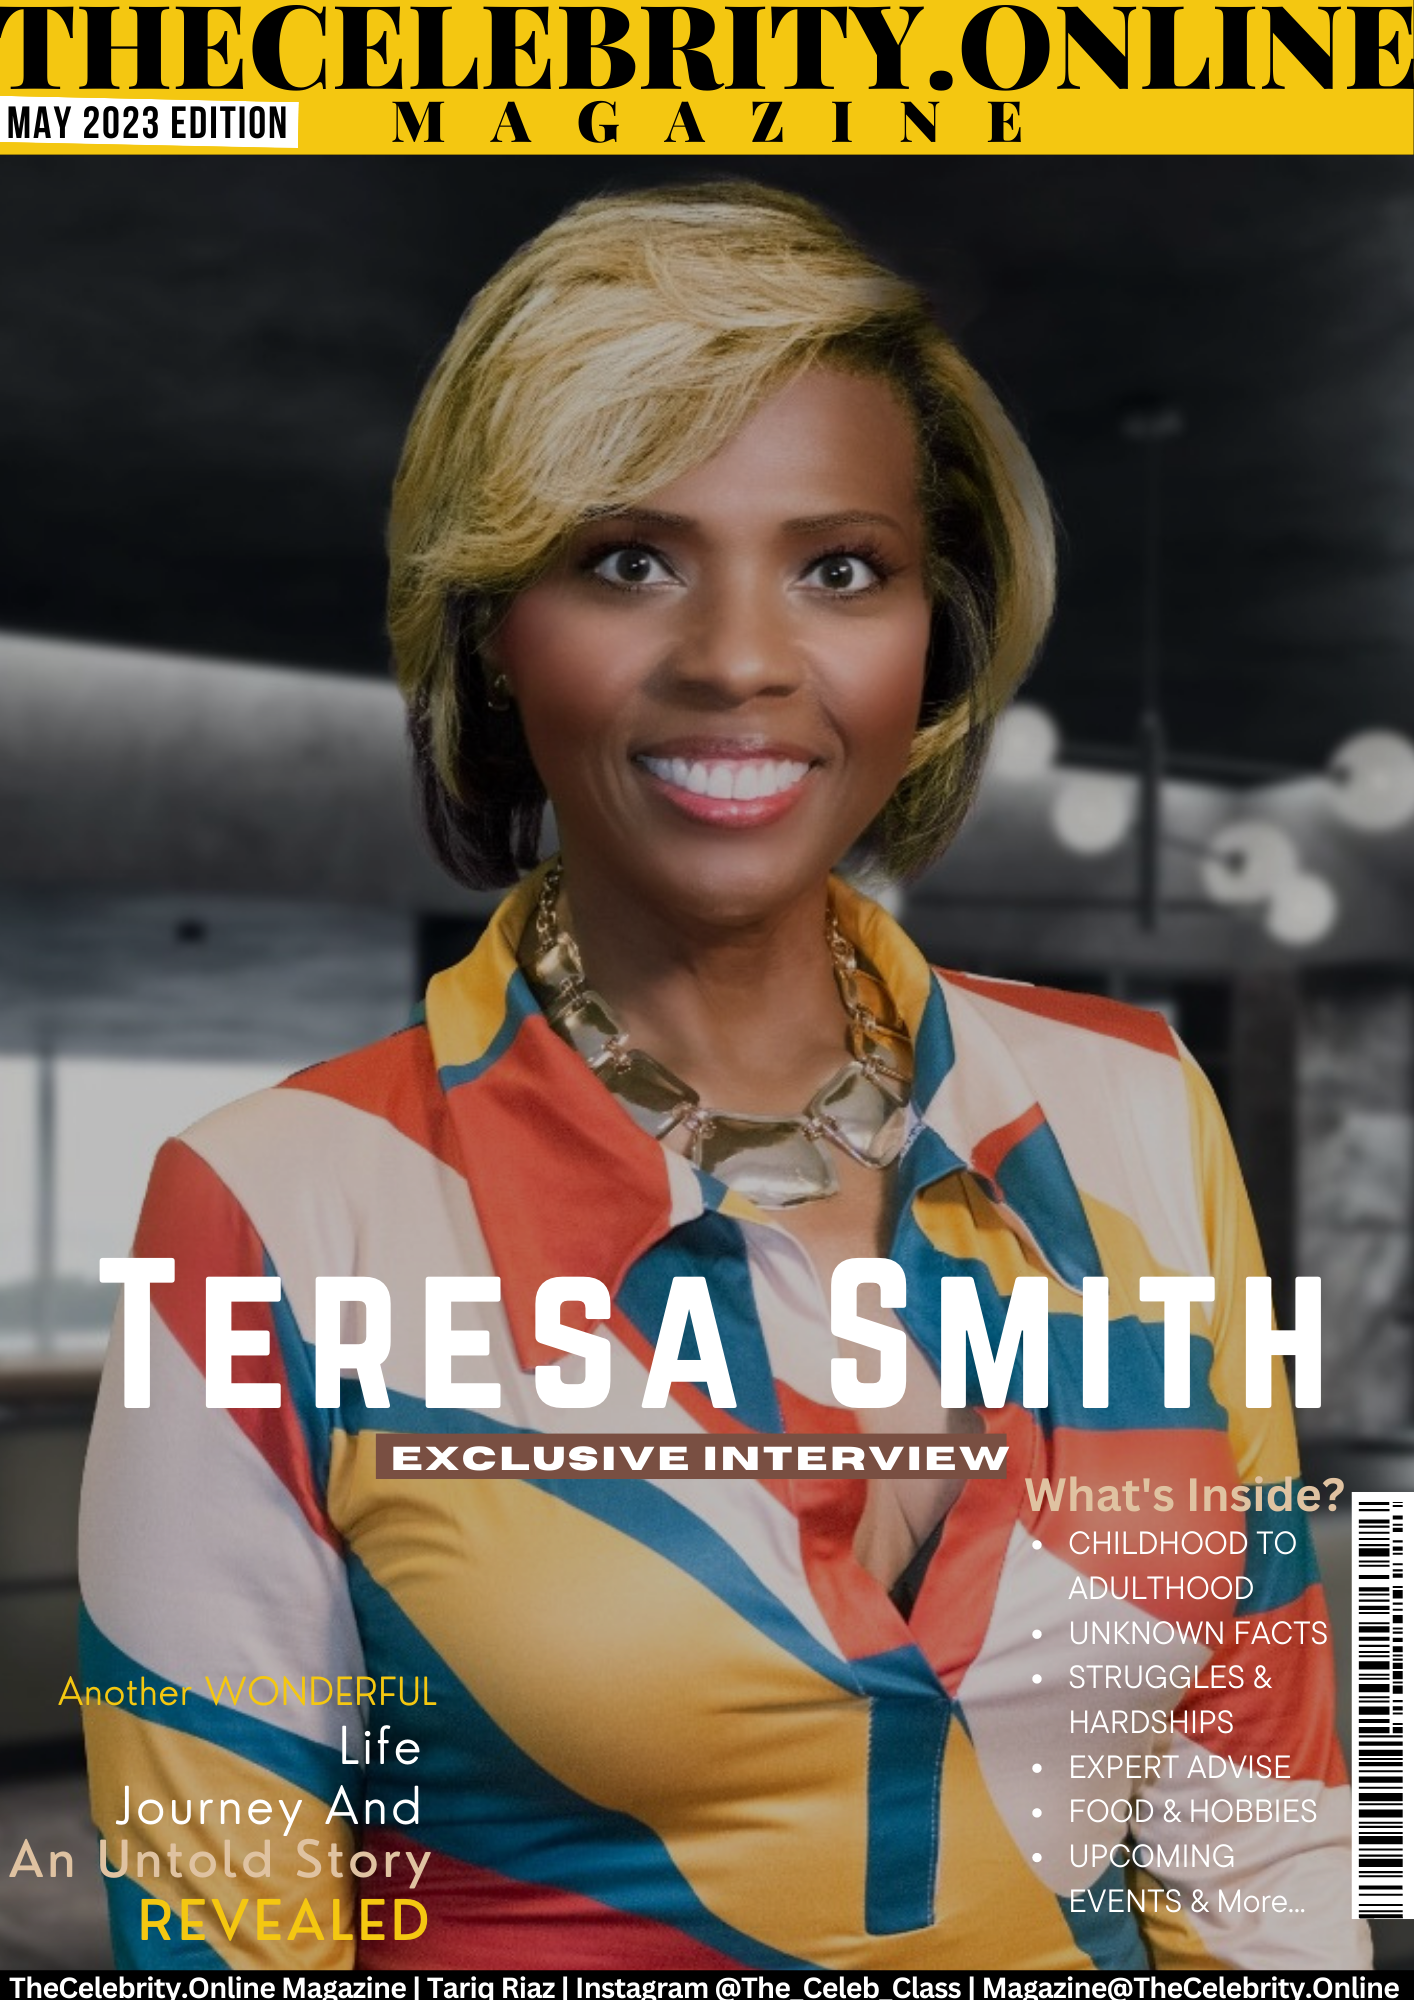 Teresa Smith Exclusive Interview – ‘Prioritize Self-Care And Your Overall Well-Being